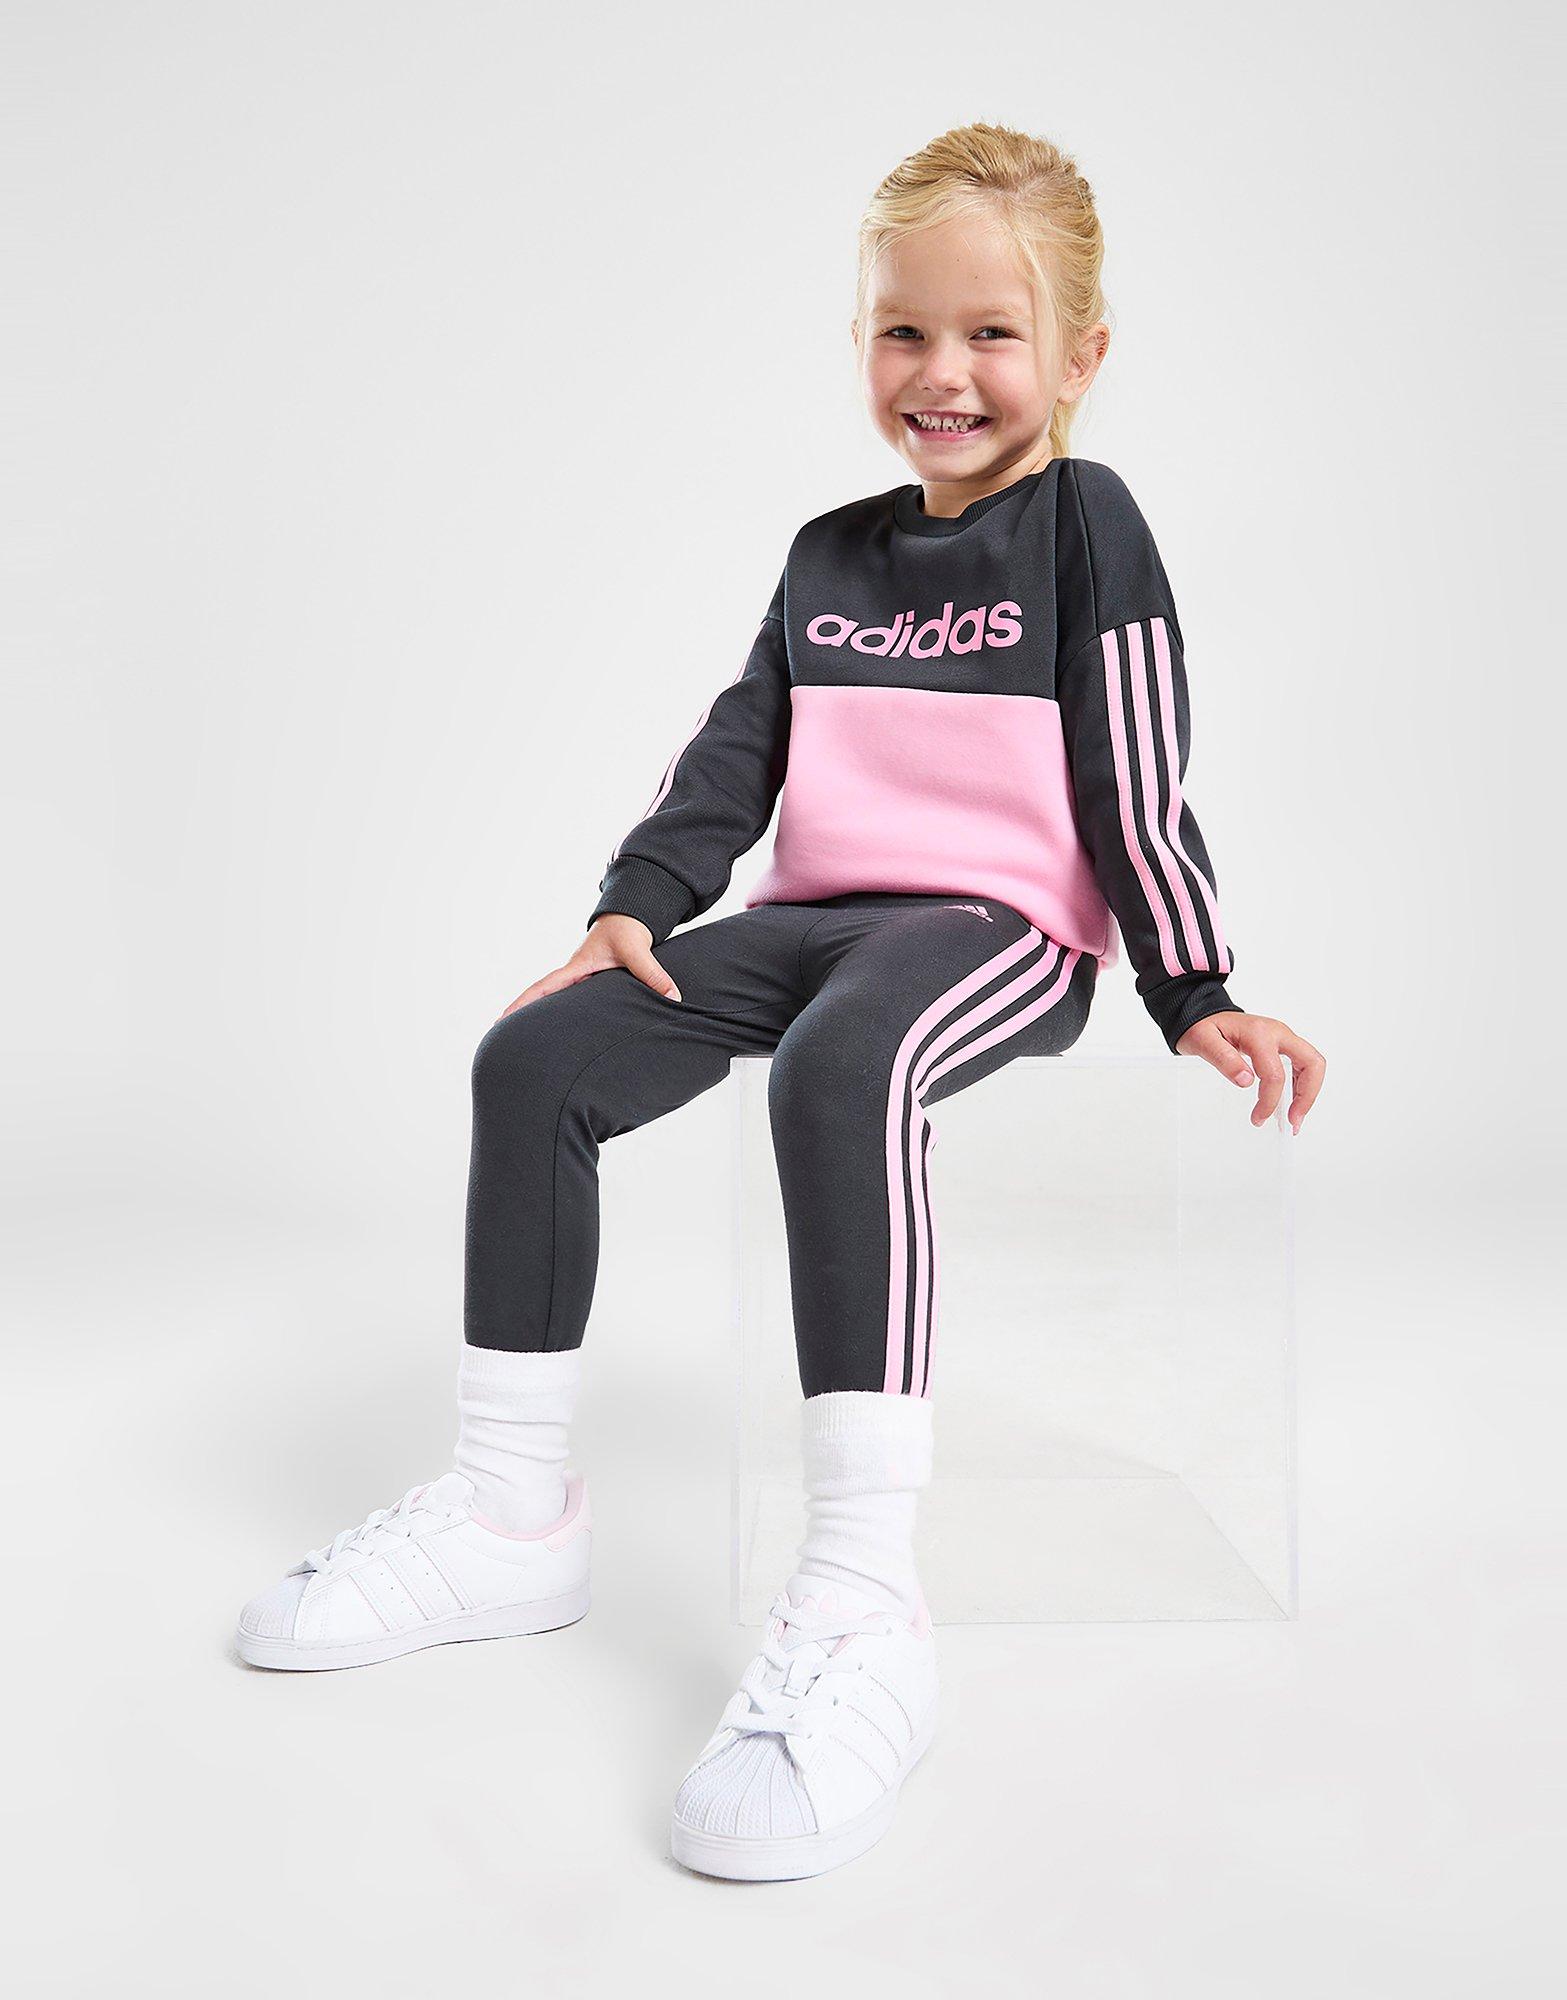 Adidas Legging Outfits-22 Ideas On How To Wear Adidas Tights  Outfits with  leggings, Adidas leggings outfit, Leggings fashion